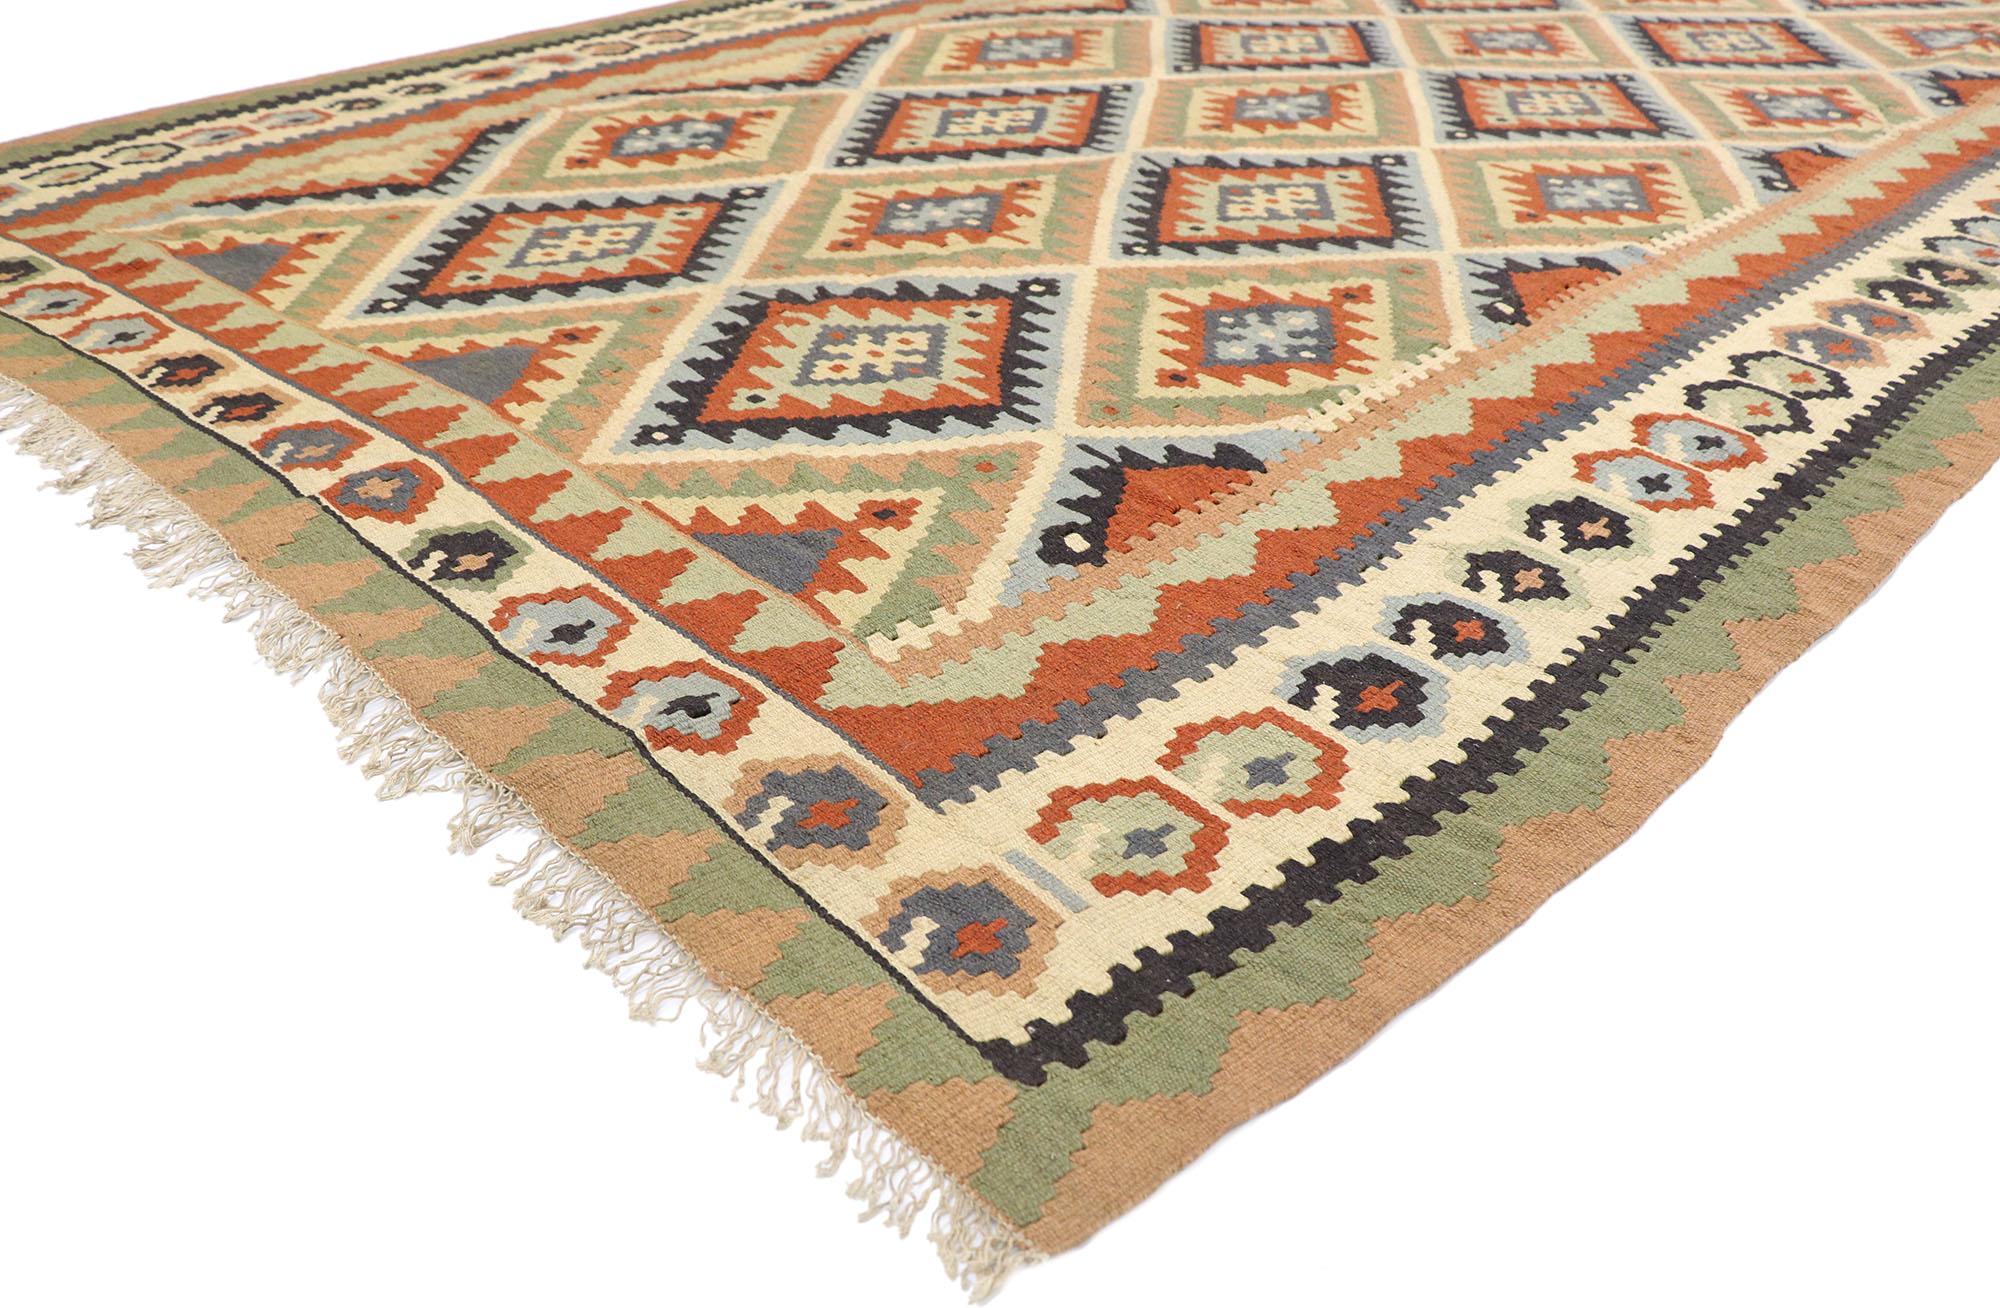 77919 Vintage Persian Shiraz Kilim rug with Southwestern Tribal Style 06'09 x 10'01. Full of tiny details and a bold expressive design combined with vibrant colors and tribal style, this hand-woven wool vintage Persian Shiraz kilim rug is a